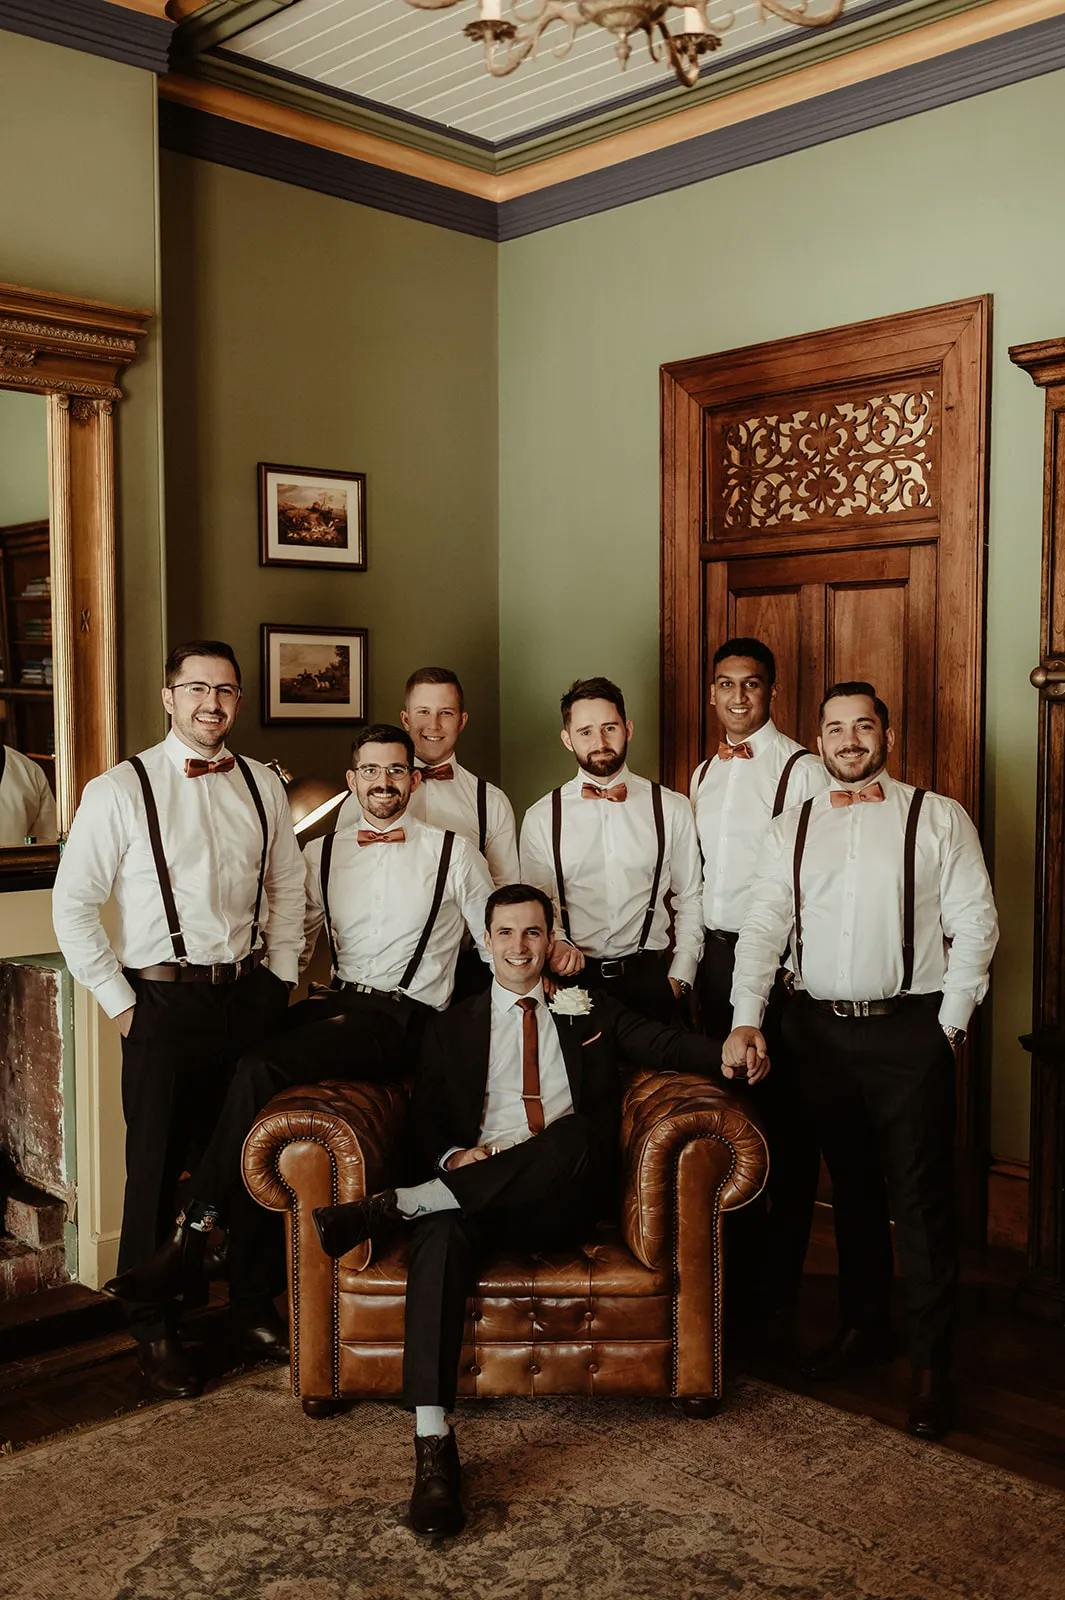 A group of seven men pose in a vintage-styled room. Six men stand behind a seated man, who is dressed in a suit with a red tie, while the standing men wear white shirts with suspenders. The room has green walls, wooden accents, and framed pictures on the wall.